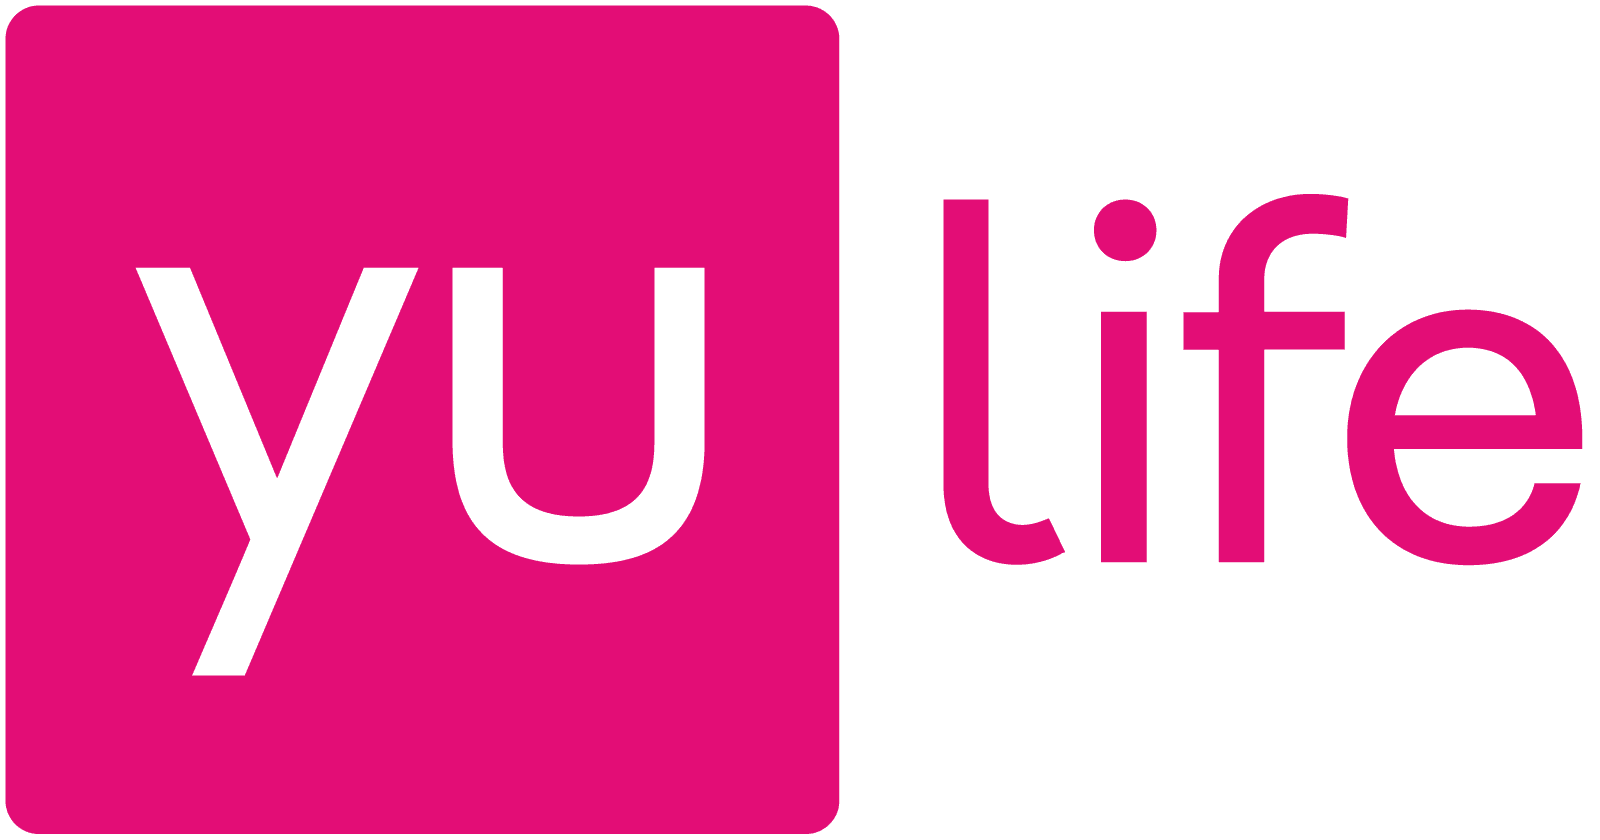 YuLife Has Chosen OnSecurity as Their Pentest Partner